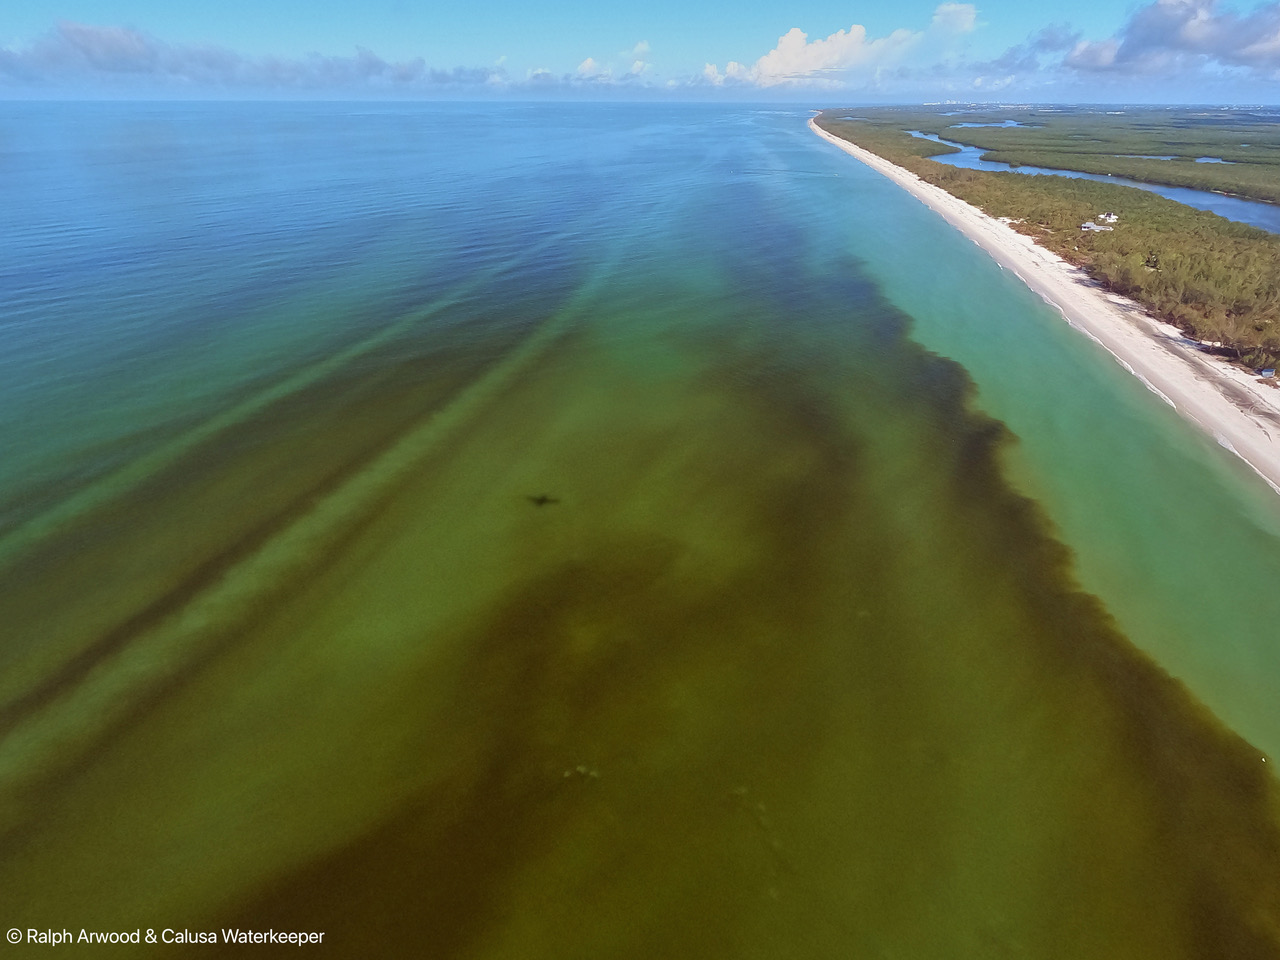 Aerial view of apparent red tide and other phytoplankton species in the water near Naples and Sanibel, Florida on 13 November 2022. According to the Florida Fish and Wildlife Conservation Commission, beaches from Sarasota to Port Charlotte varied between low, medium, and high levels of red tide. Because Hurricane Ian brought so much rain to Florida in October, scientists on the coast closely monitored water quality to see if the storm had any impacts. Photo: Ralph Arwood / Calusa Waterkeeper